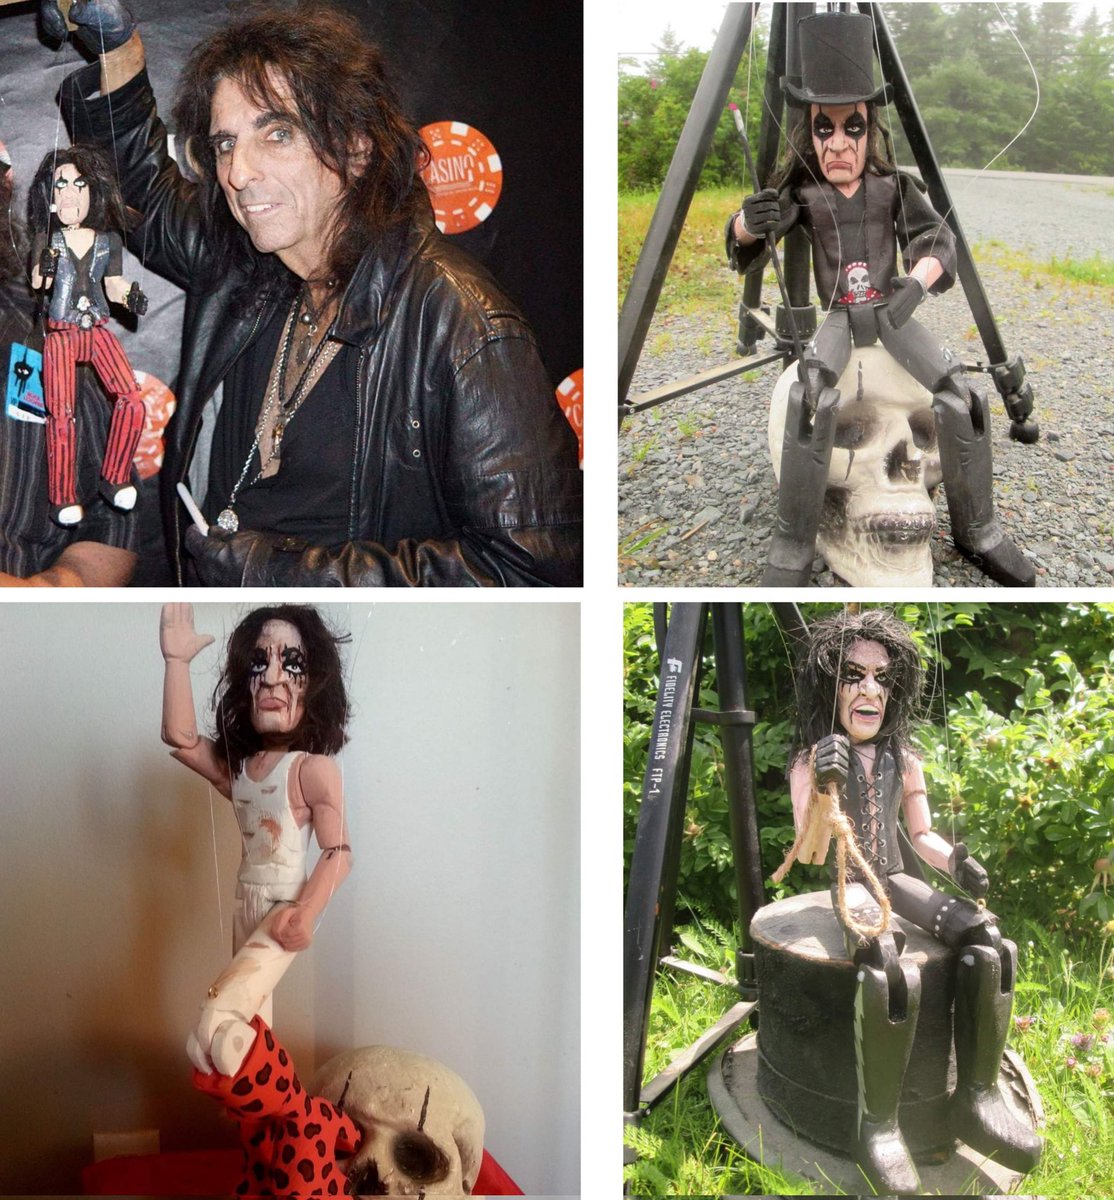 I love carving wooden Alice marionettes, I find it relaxing.@alicecooper @NightswithAlice #ALICE #AliceCooper #shockrock